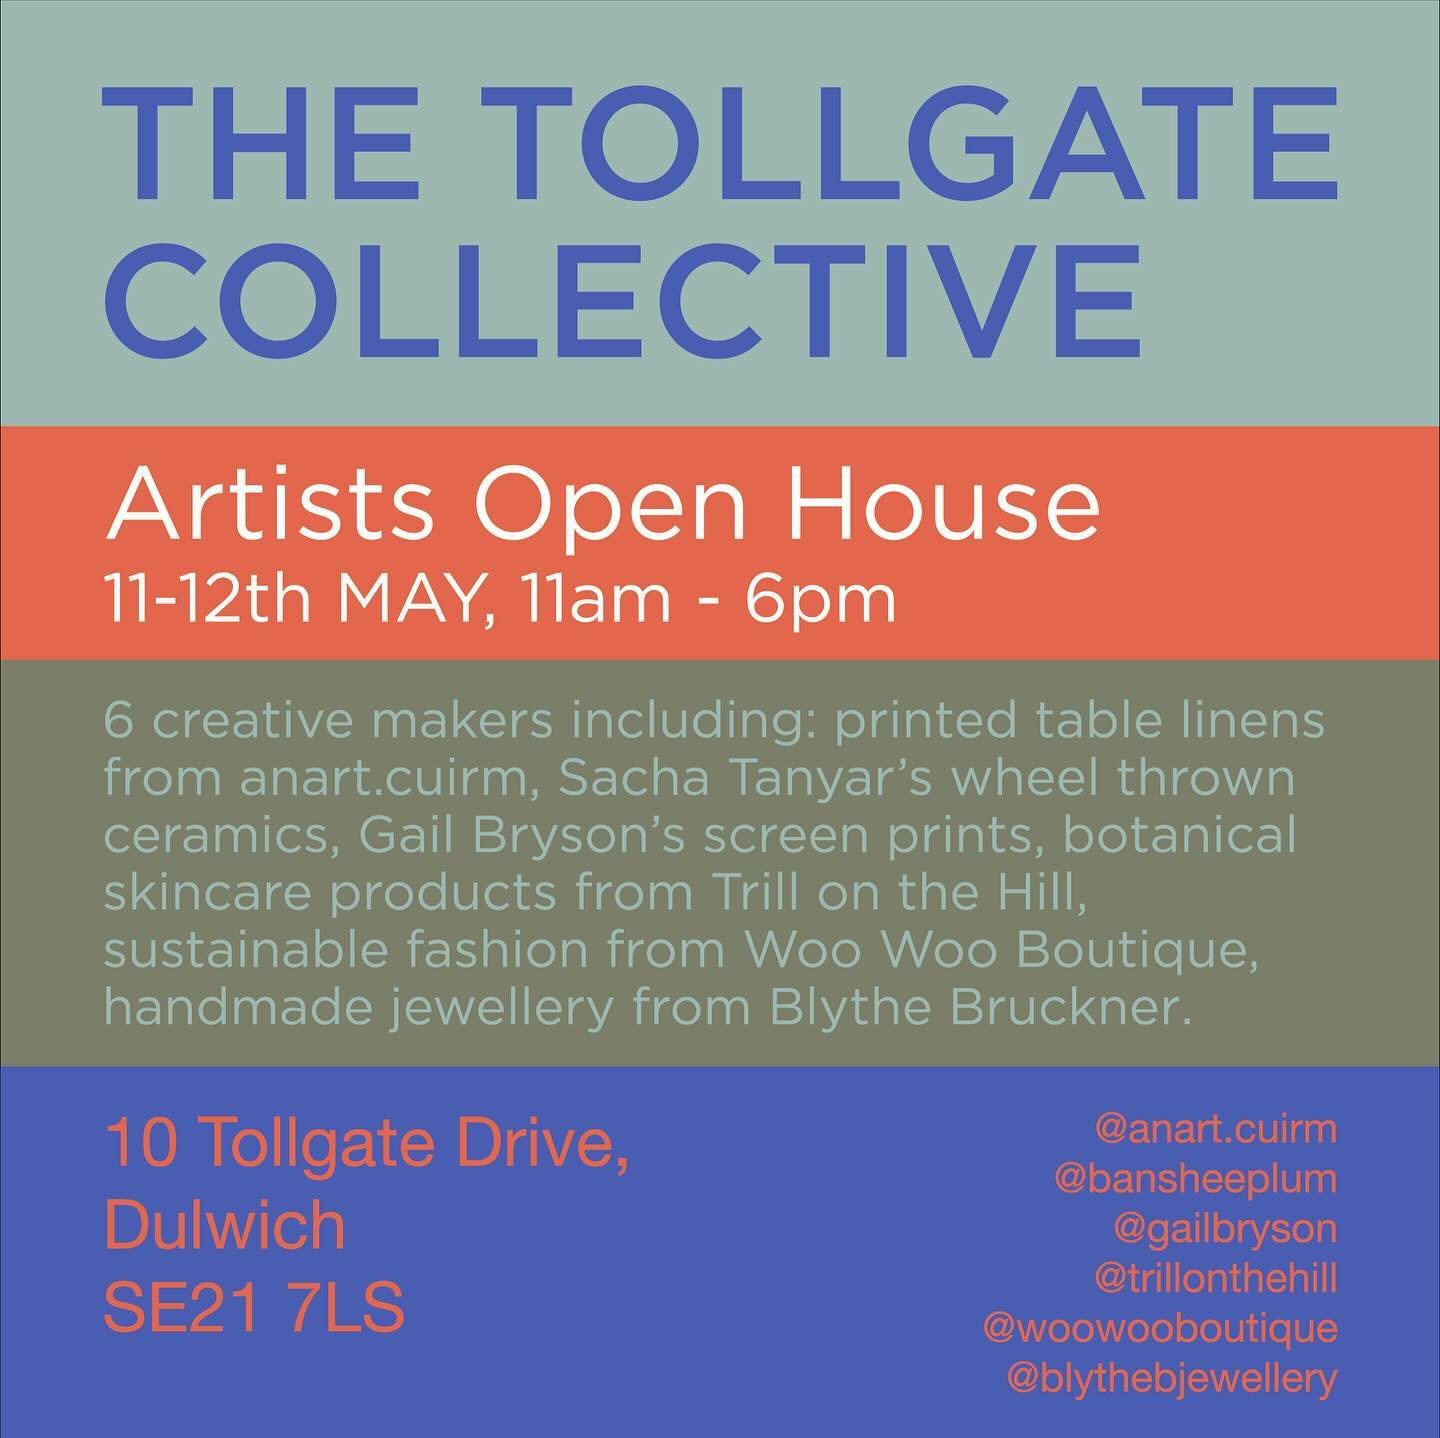 We are in London this weekend selling our wares @artistsopenhse. We&rsquo;ll be in good company alongside @gailbryson @anart.cuirm @woowooboutique @bansheeplum @blythebjewellery. 

May 11th-12th 11-6pm. 
10 Tollgate drive, SE21 7LS

Our natural skinc